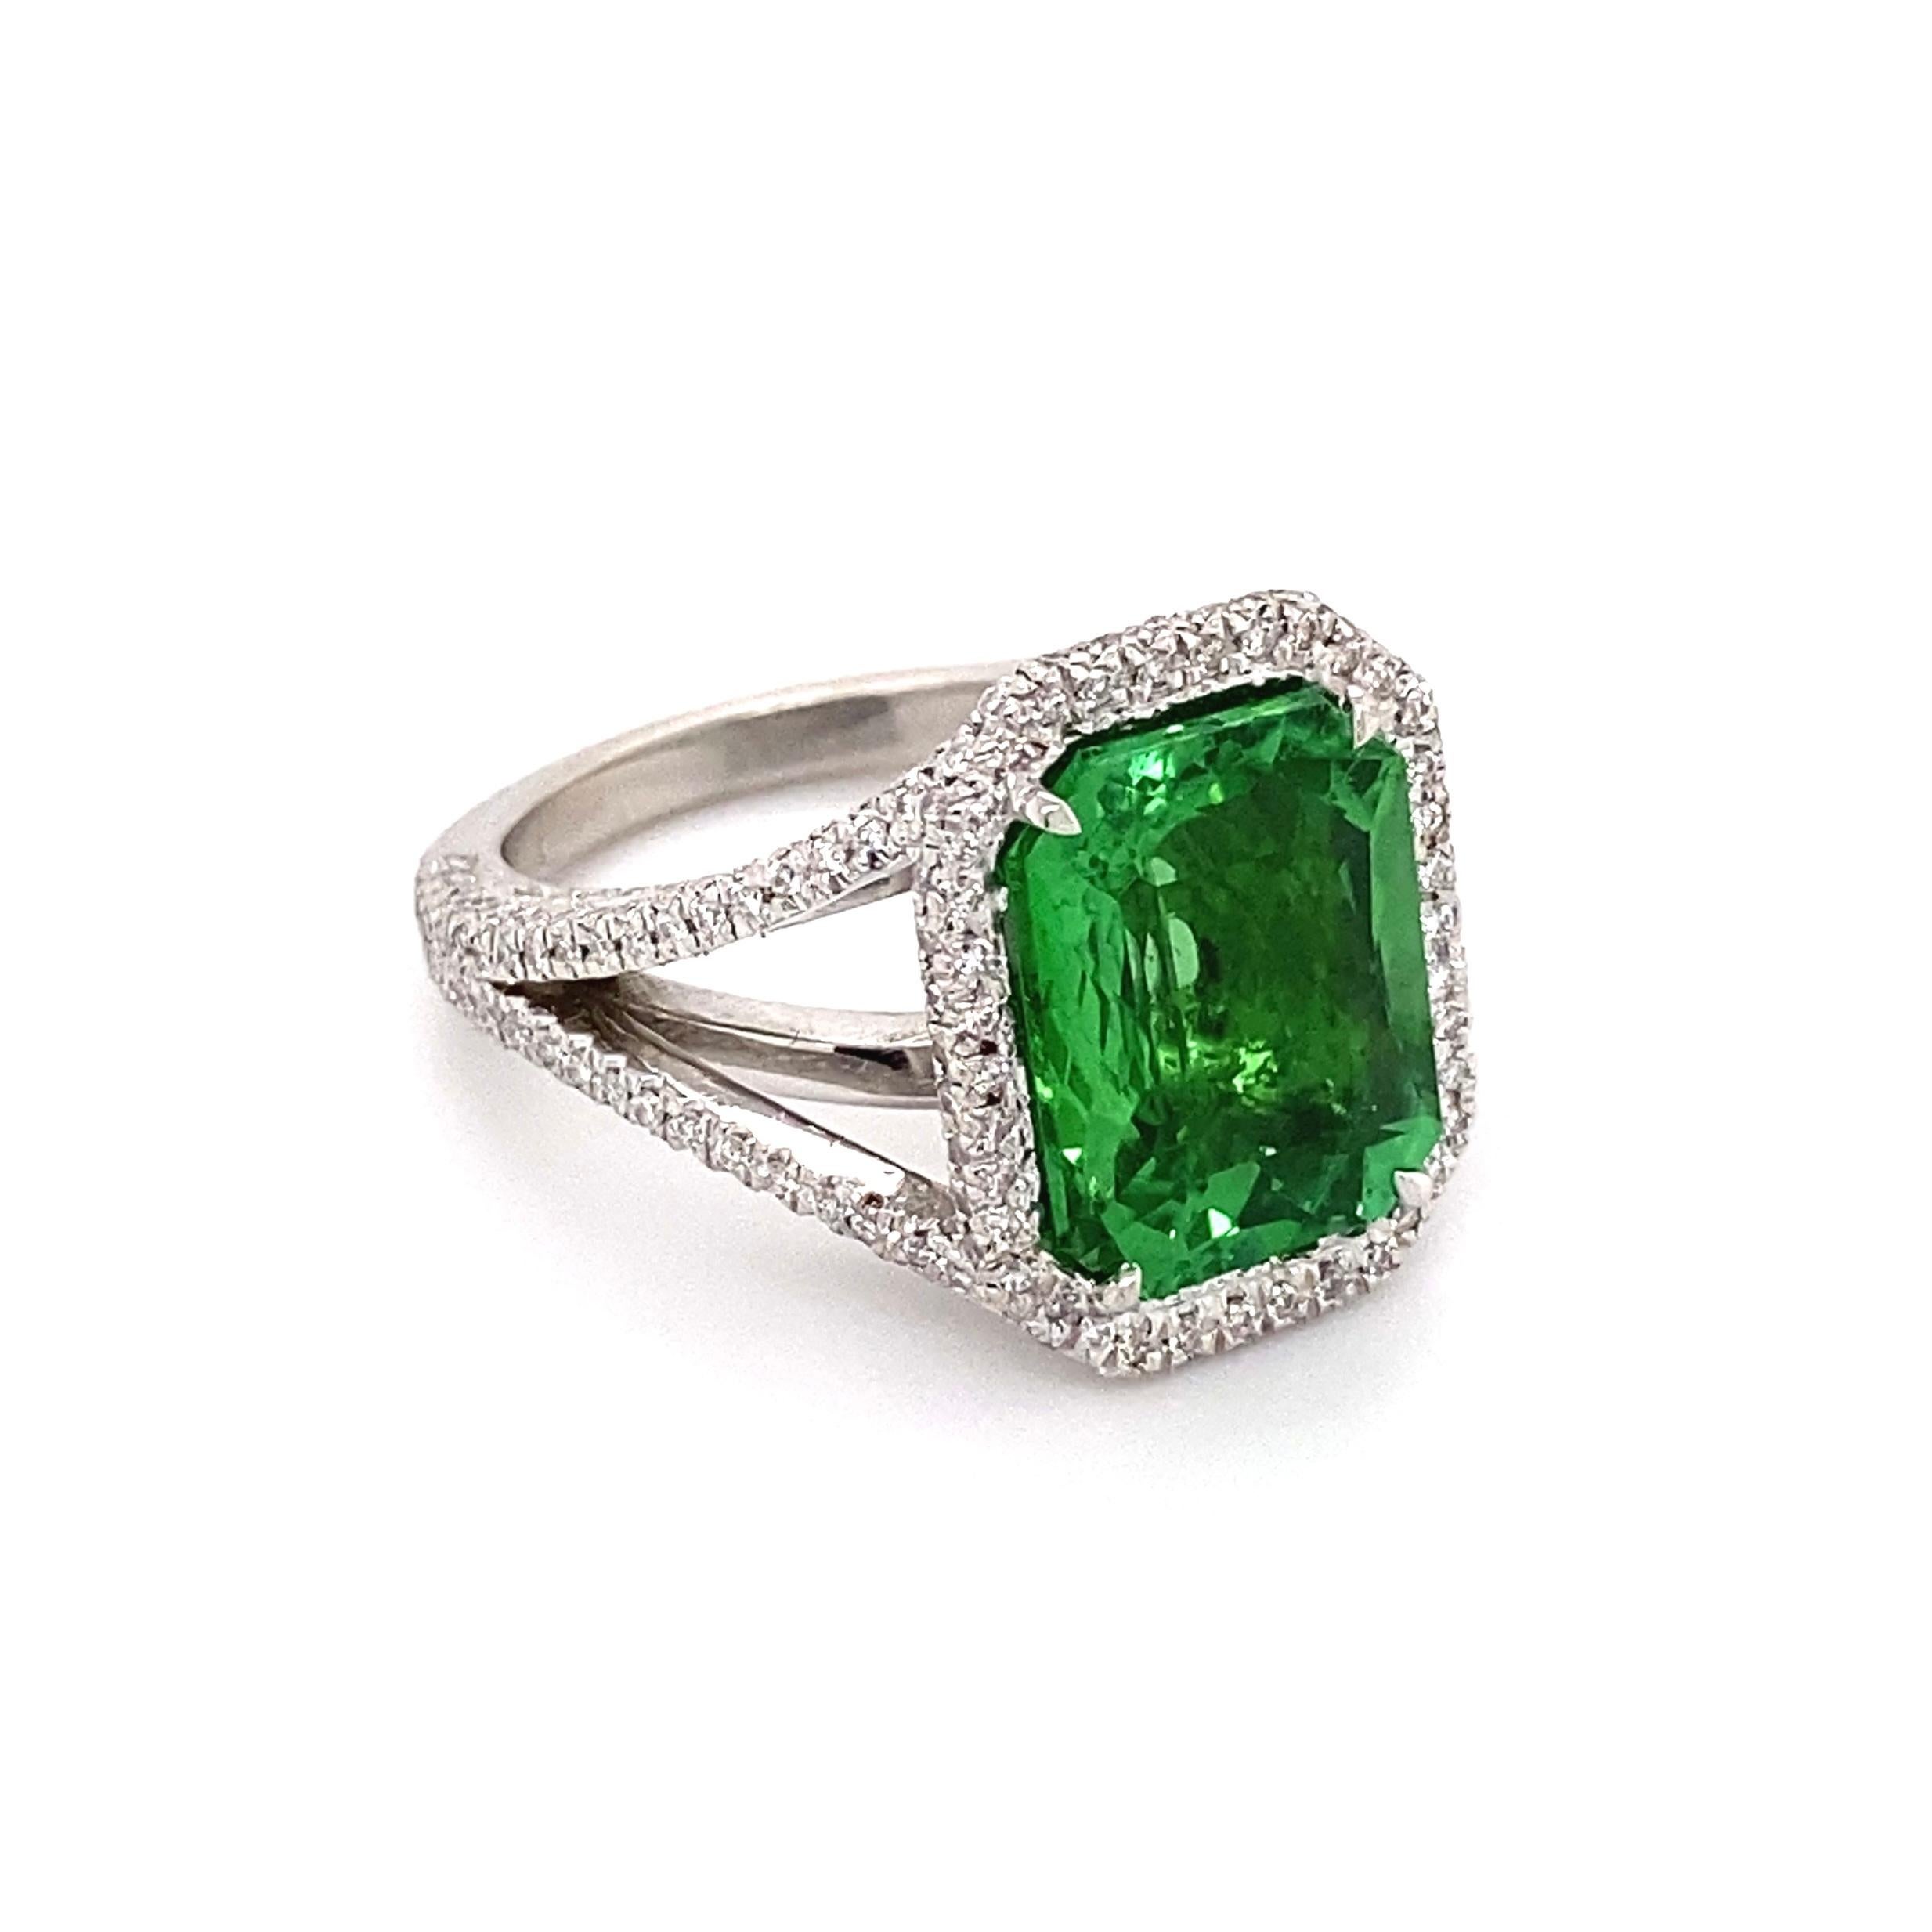 Beautiful Green Paraiba Tourmaline and Diamond Platinum Cocktail Ring, center securely hand set with an Octagonal Paraiba, weighing approx. 6.00 Carat; surrounded by prong set Diamonds approx. 2.27tcw. Hand crafted centerpiece of an amazing Platinum